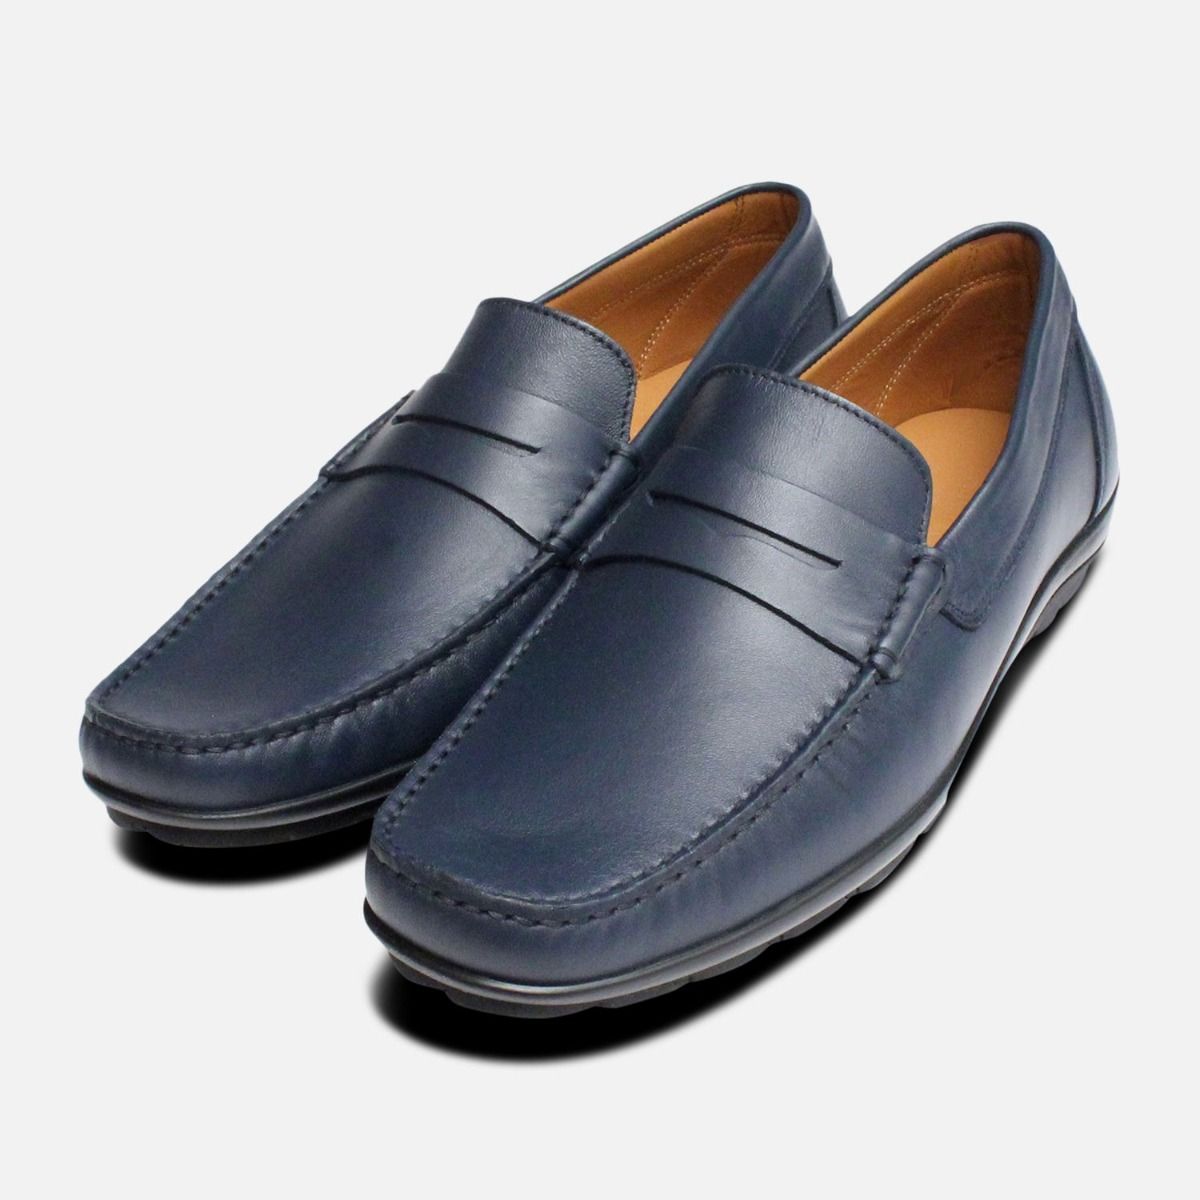 blue moccasin shoes